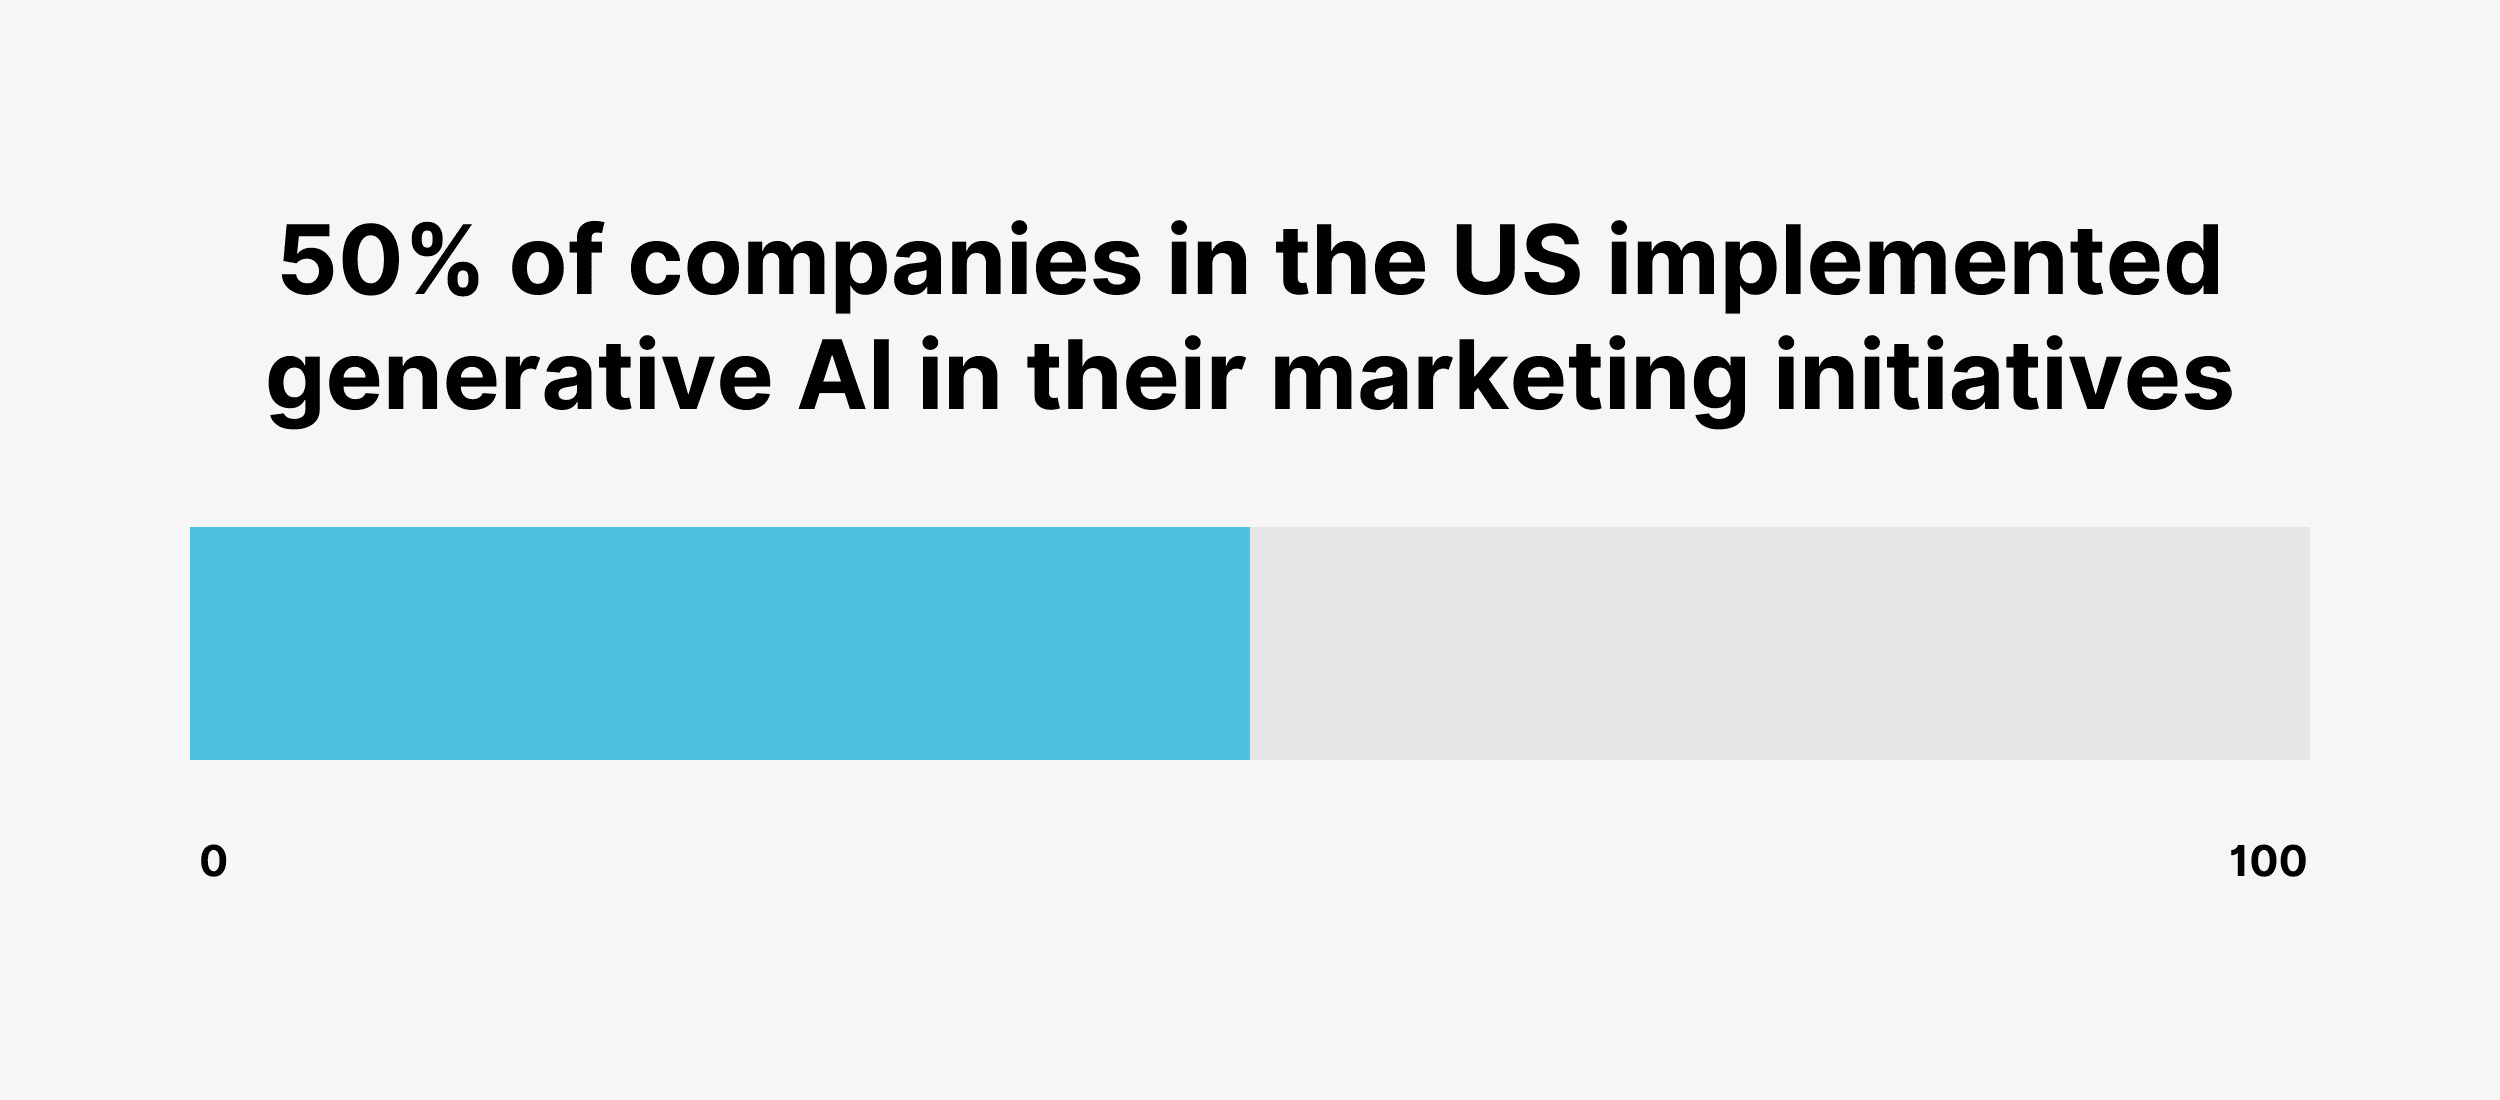 50% of companies in the US implemented generative AI in their marketing initiatives